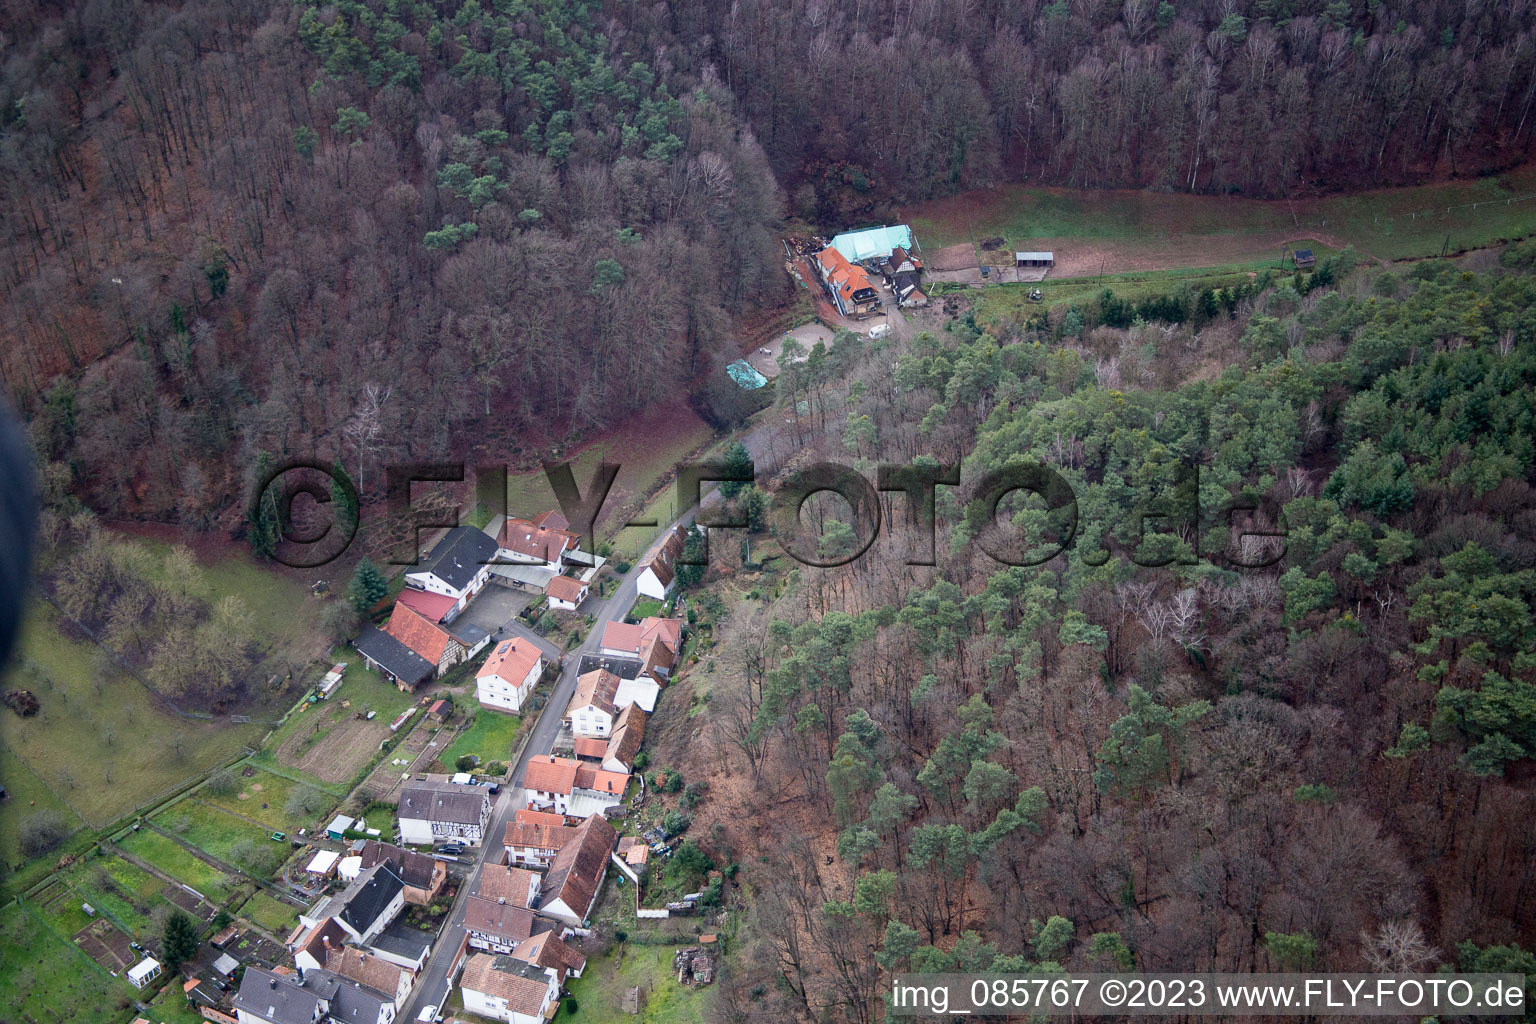 Oberotterbach in the state Rhineland-Palatinate, Germany seen from a drone